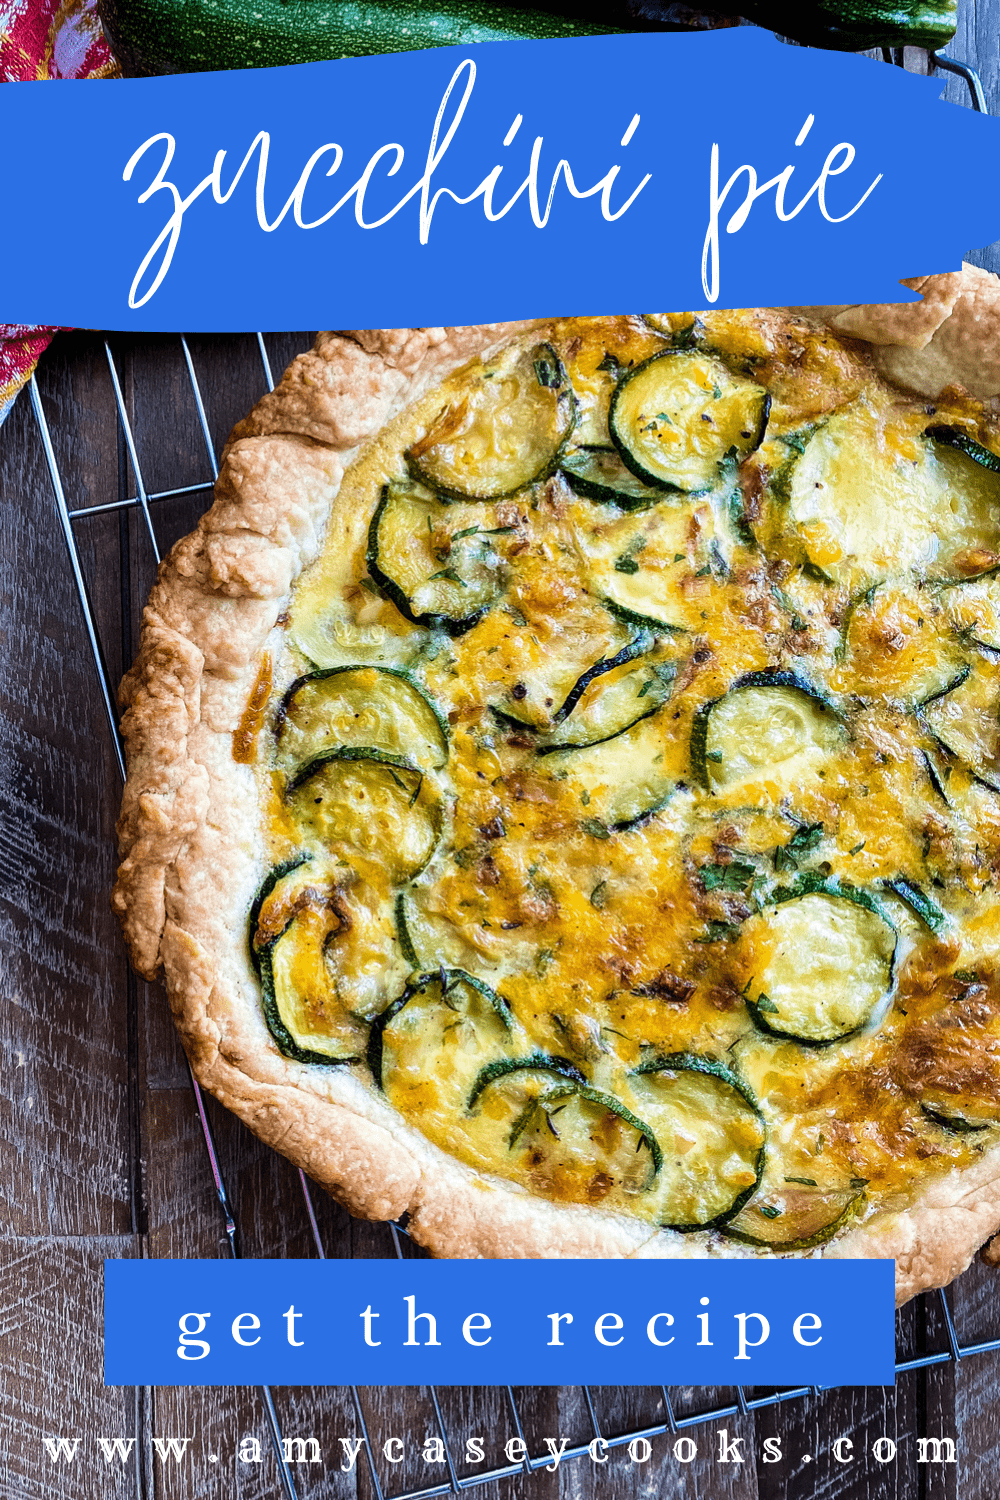 a savory pie with zucchini and fresh herbs